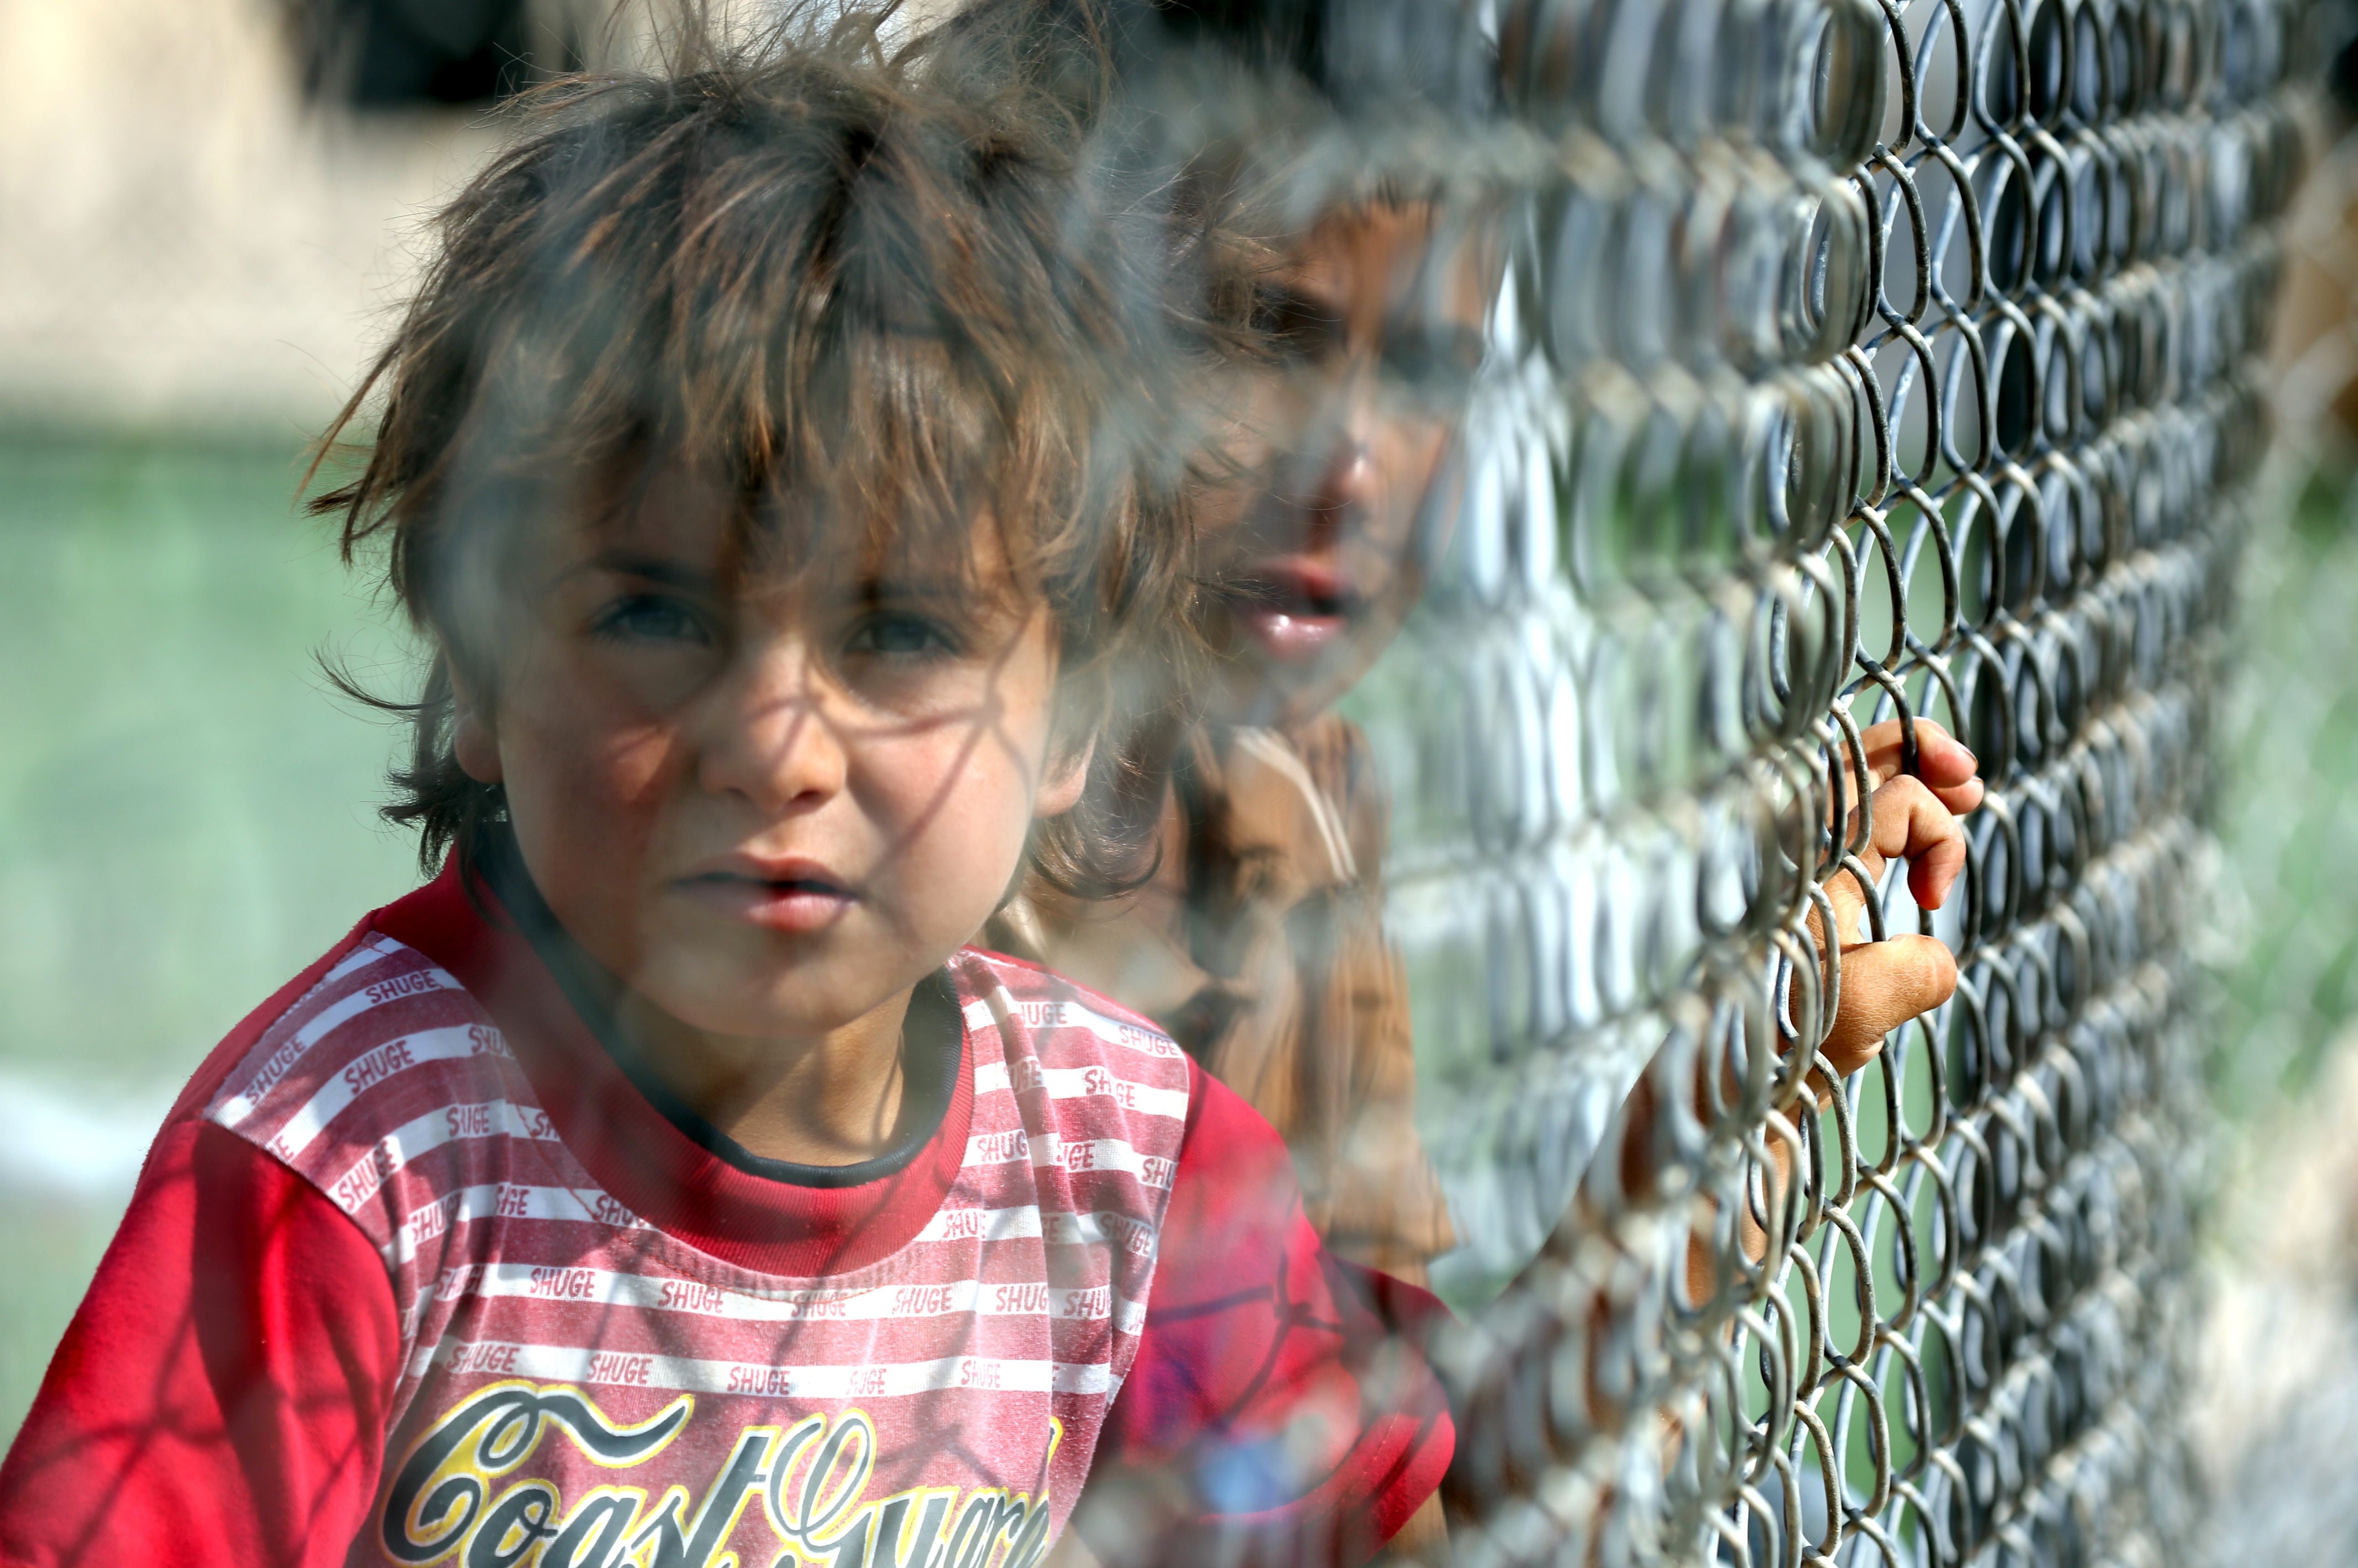 Iraqi children look from behind a fence at the Al-Hol refugee camp in Syria